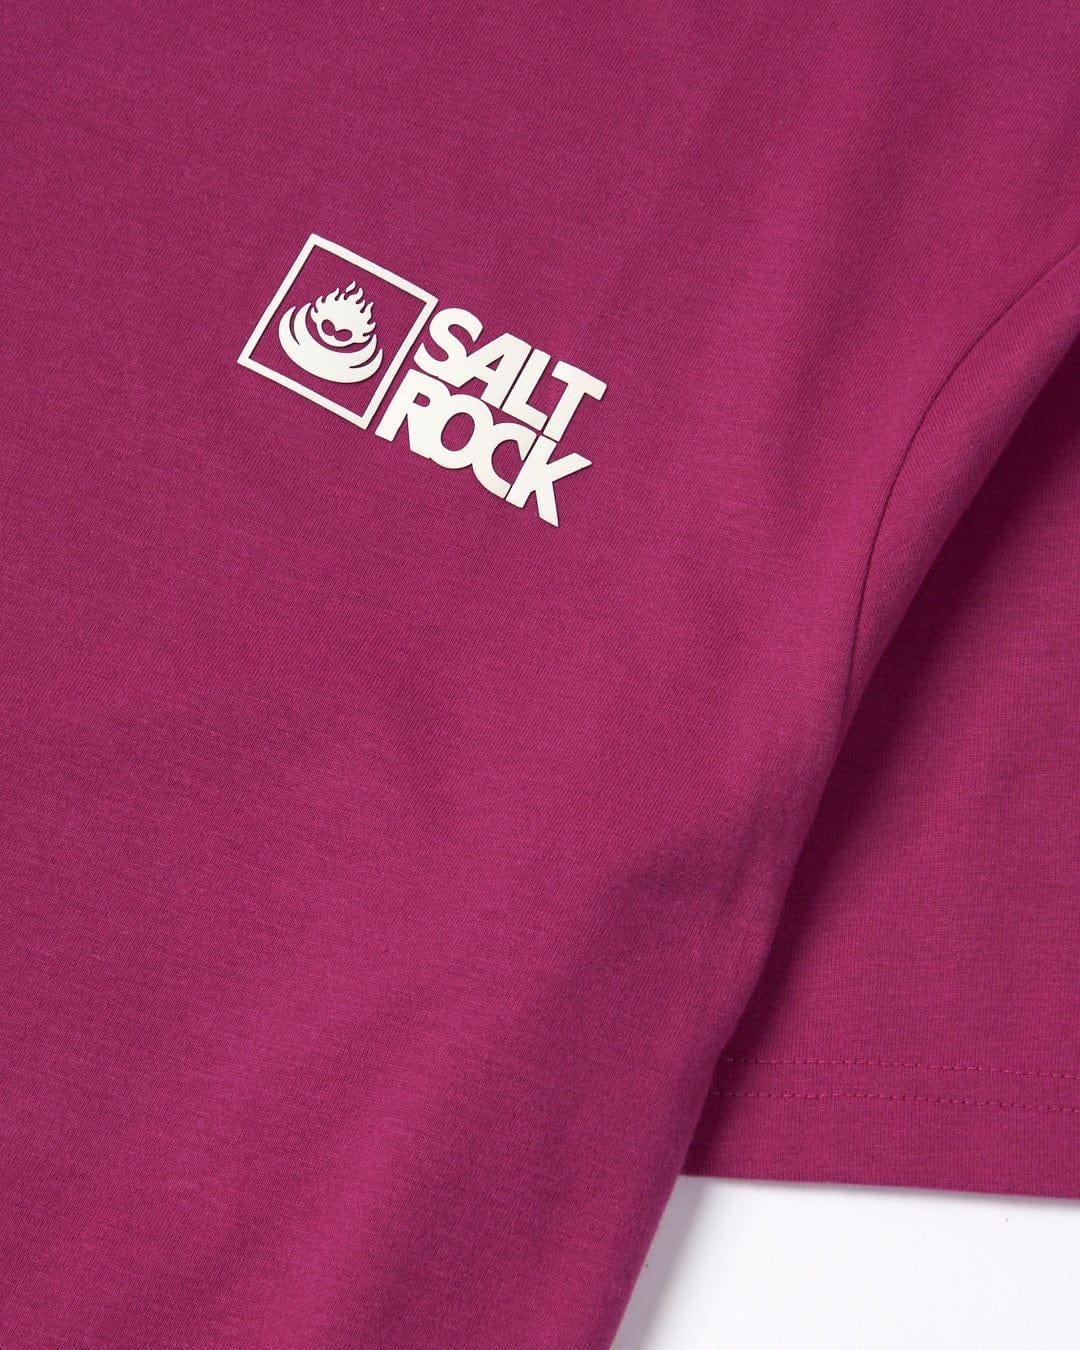 Close-up of a Saltrock Original - Mens Short Sleeve T-Shirt in burgundy with a white "Saltrock" logo on the chest.